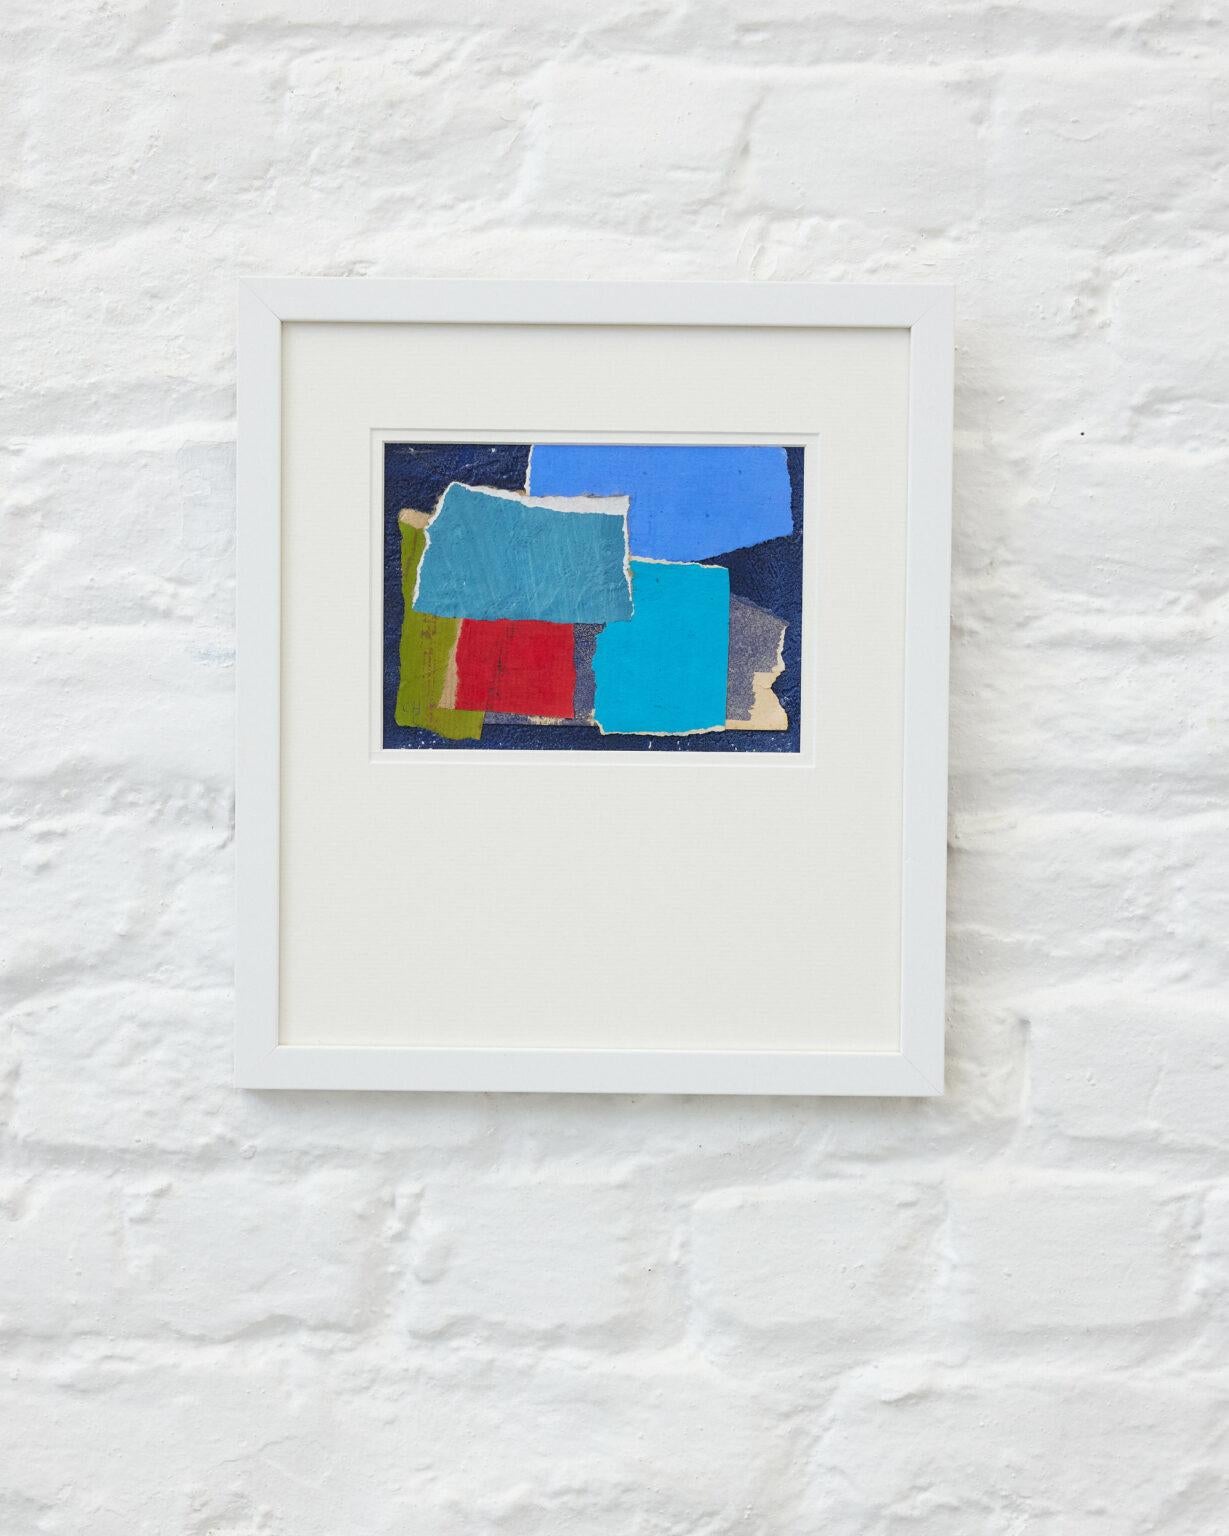 Gouaches and collages on paper (16 x 12 cm), framed with a double mat acid-free, museum glass.